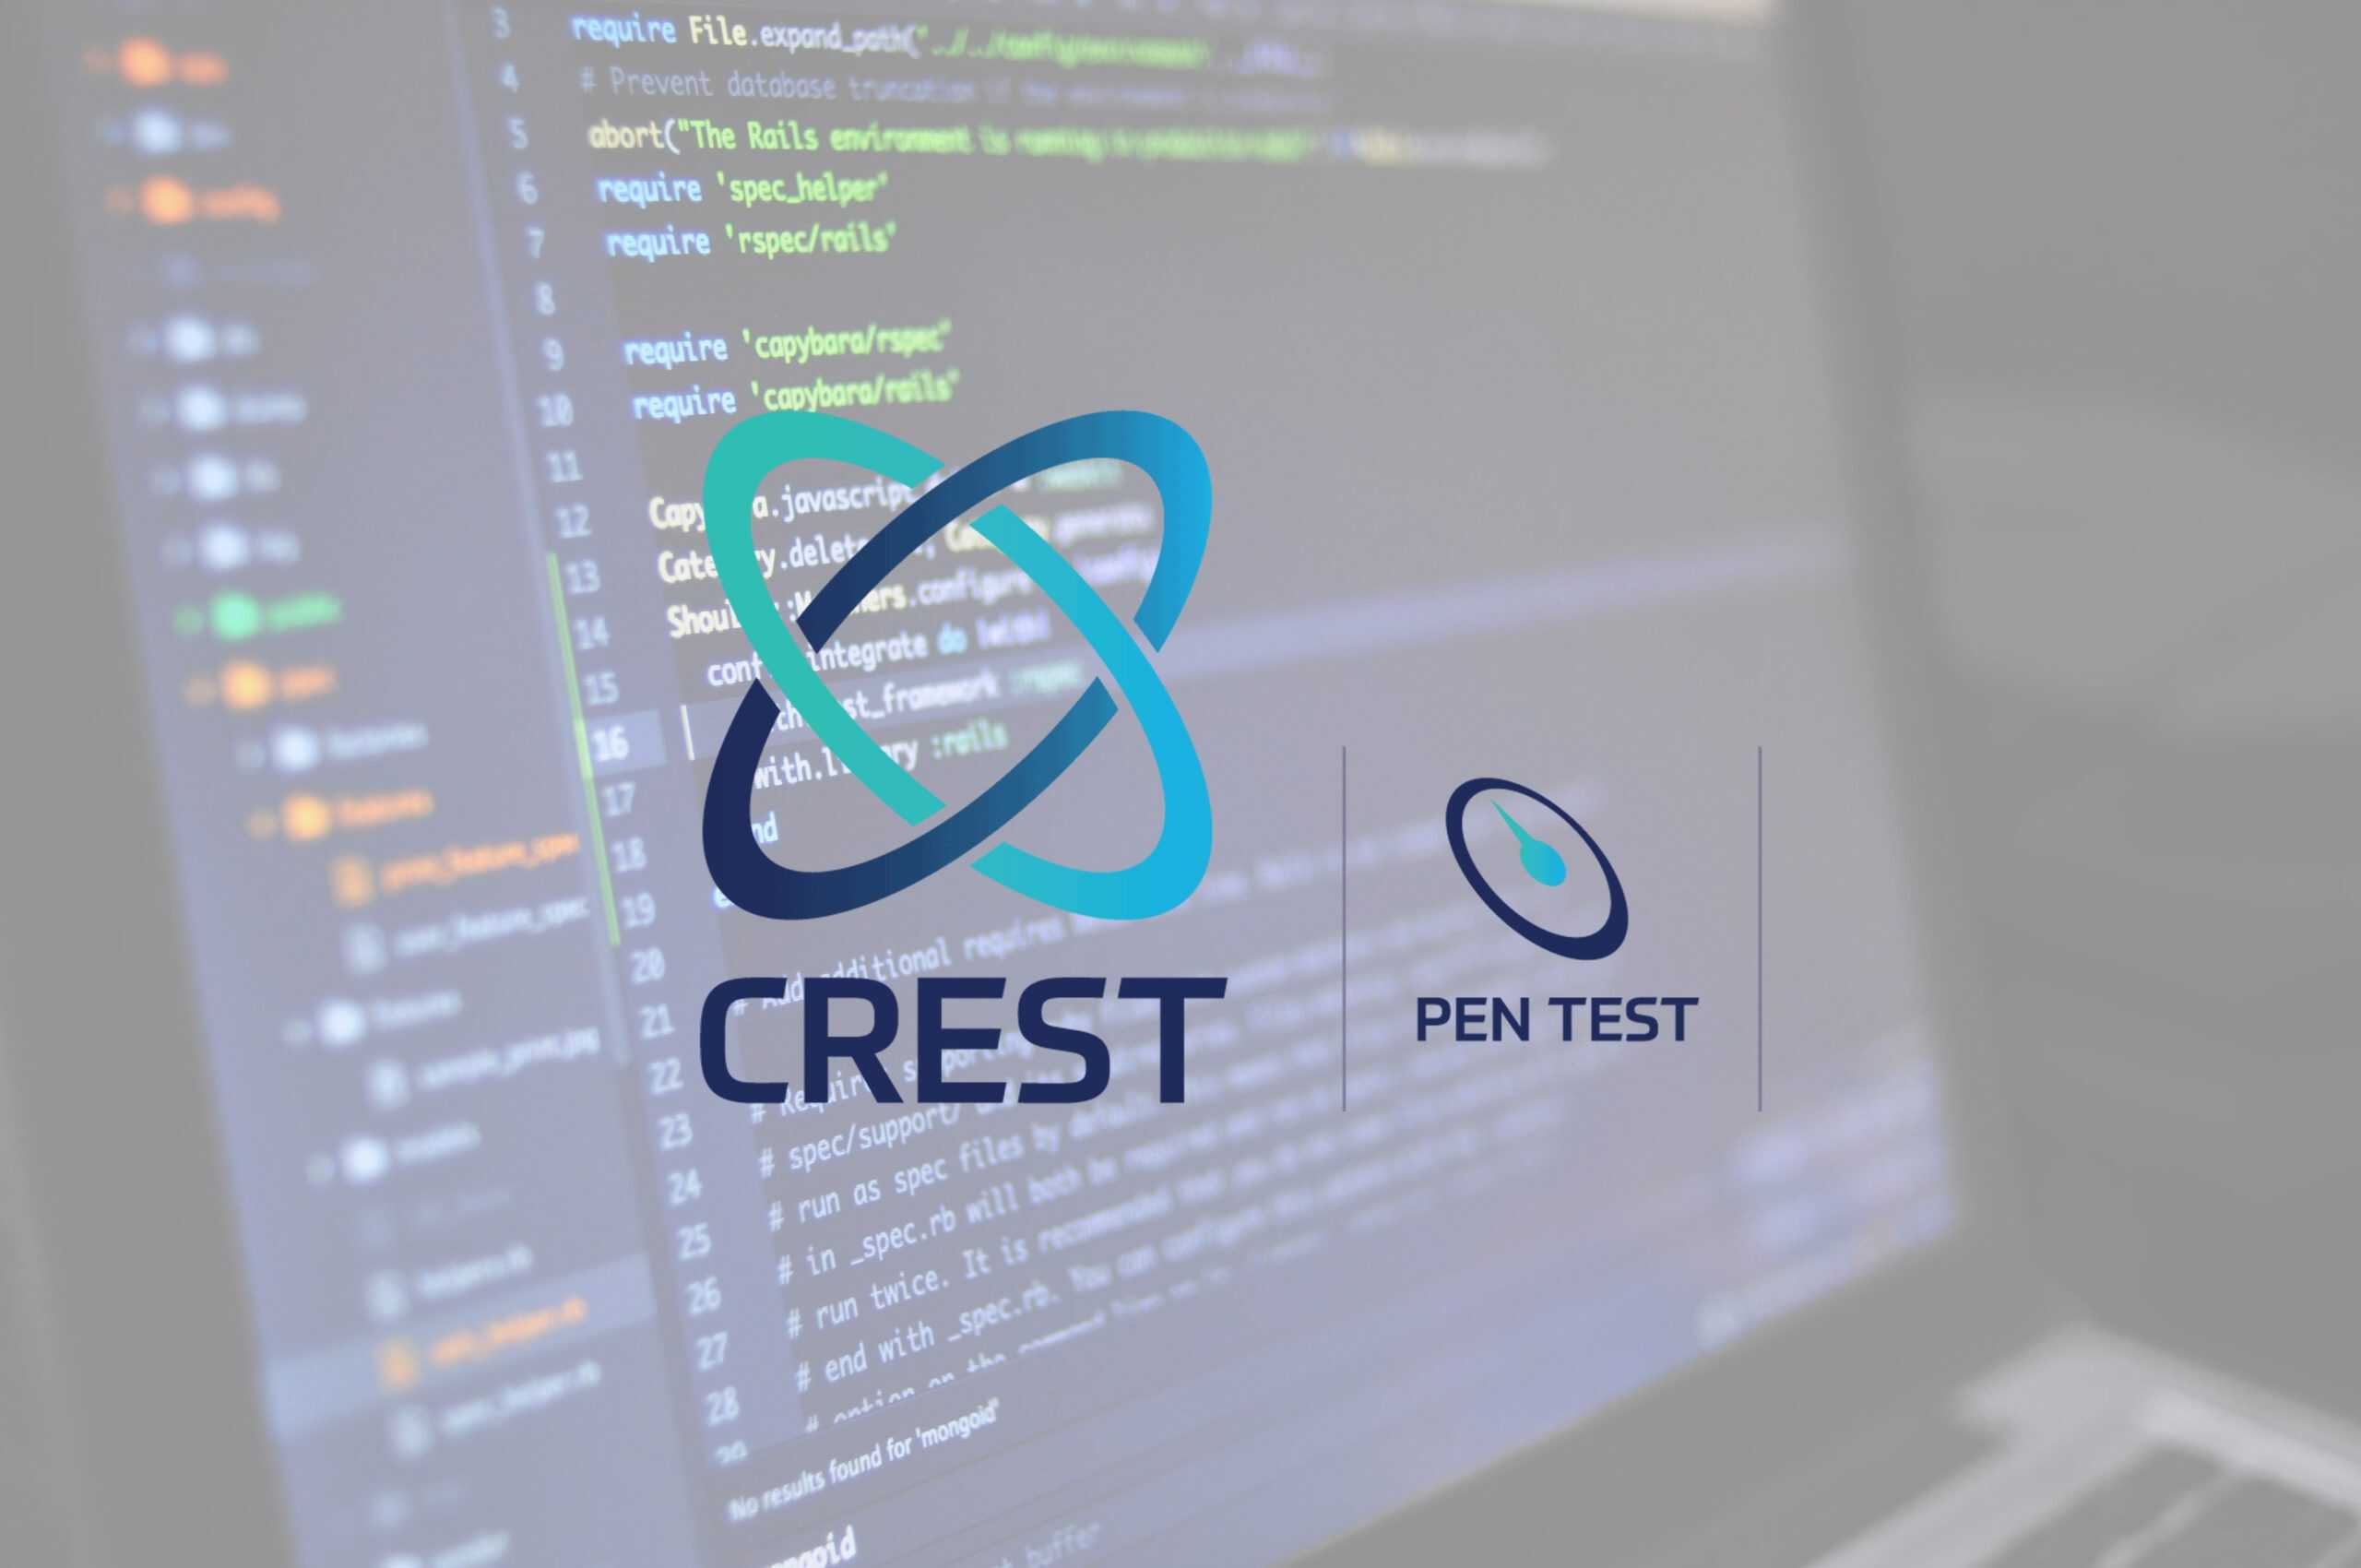 Akita's staff are certified for penetration testing services by CREST